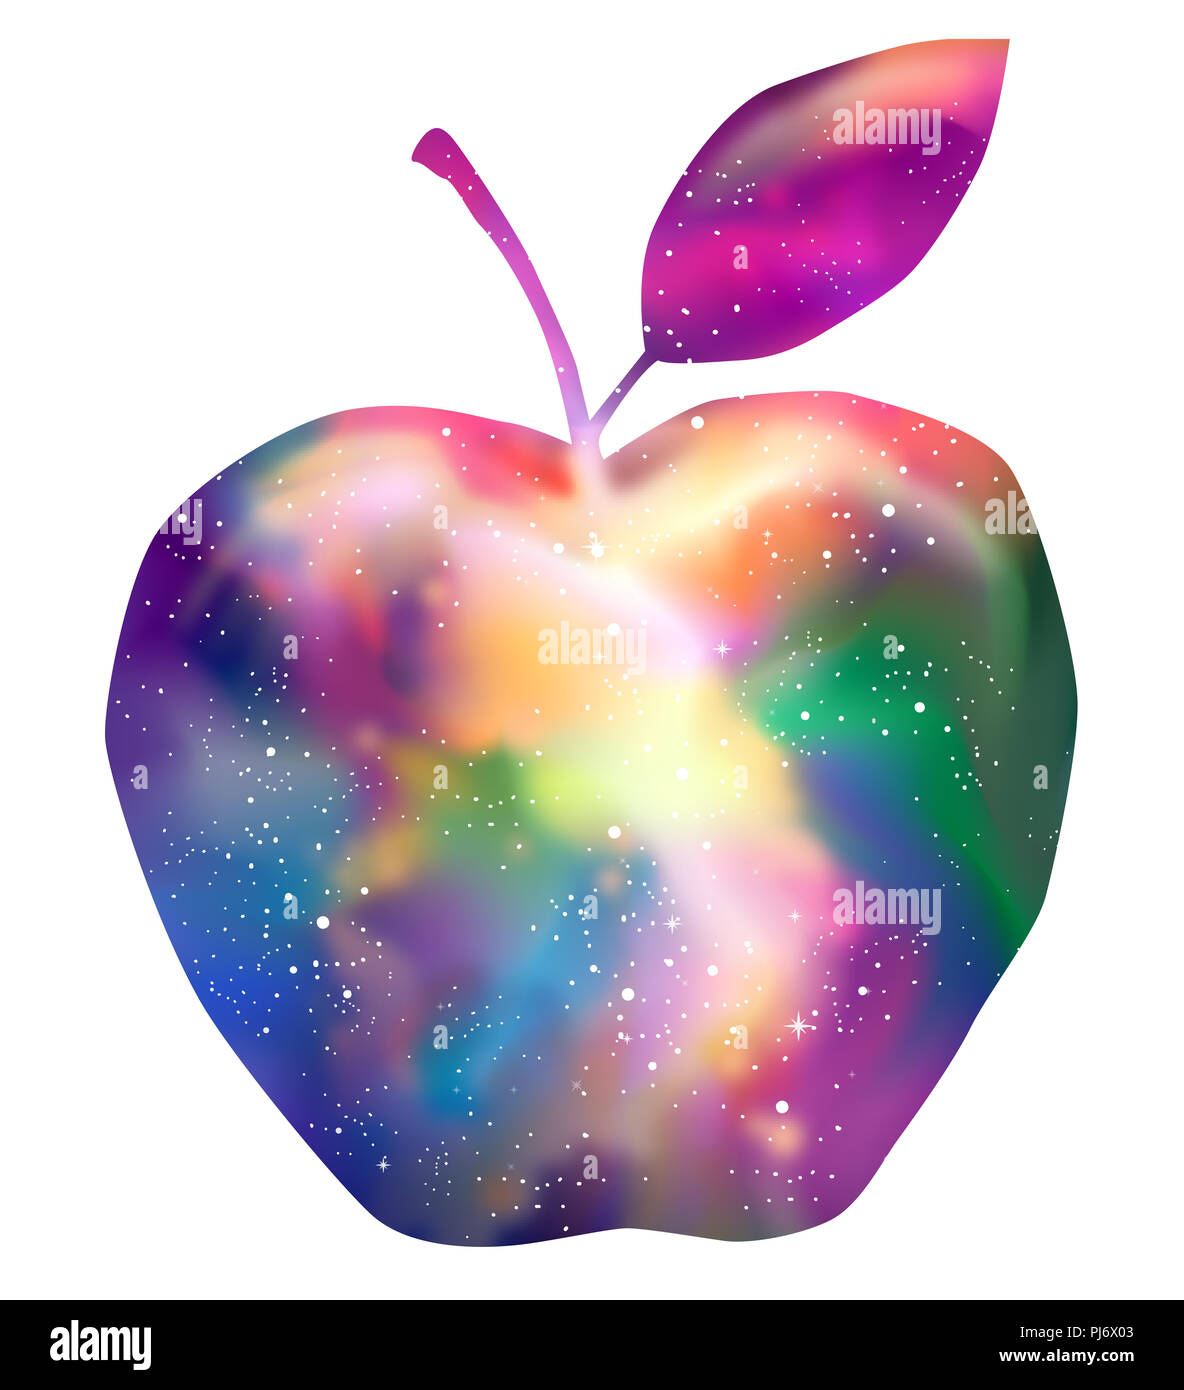 Illustration of an Apple Showing a Fantasy Galaxy Design eps10 Stock Photo